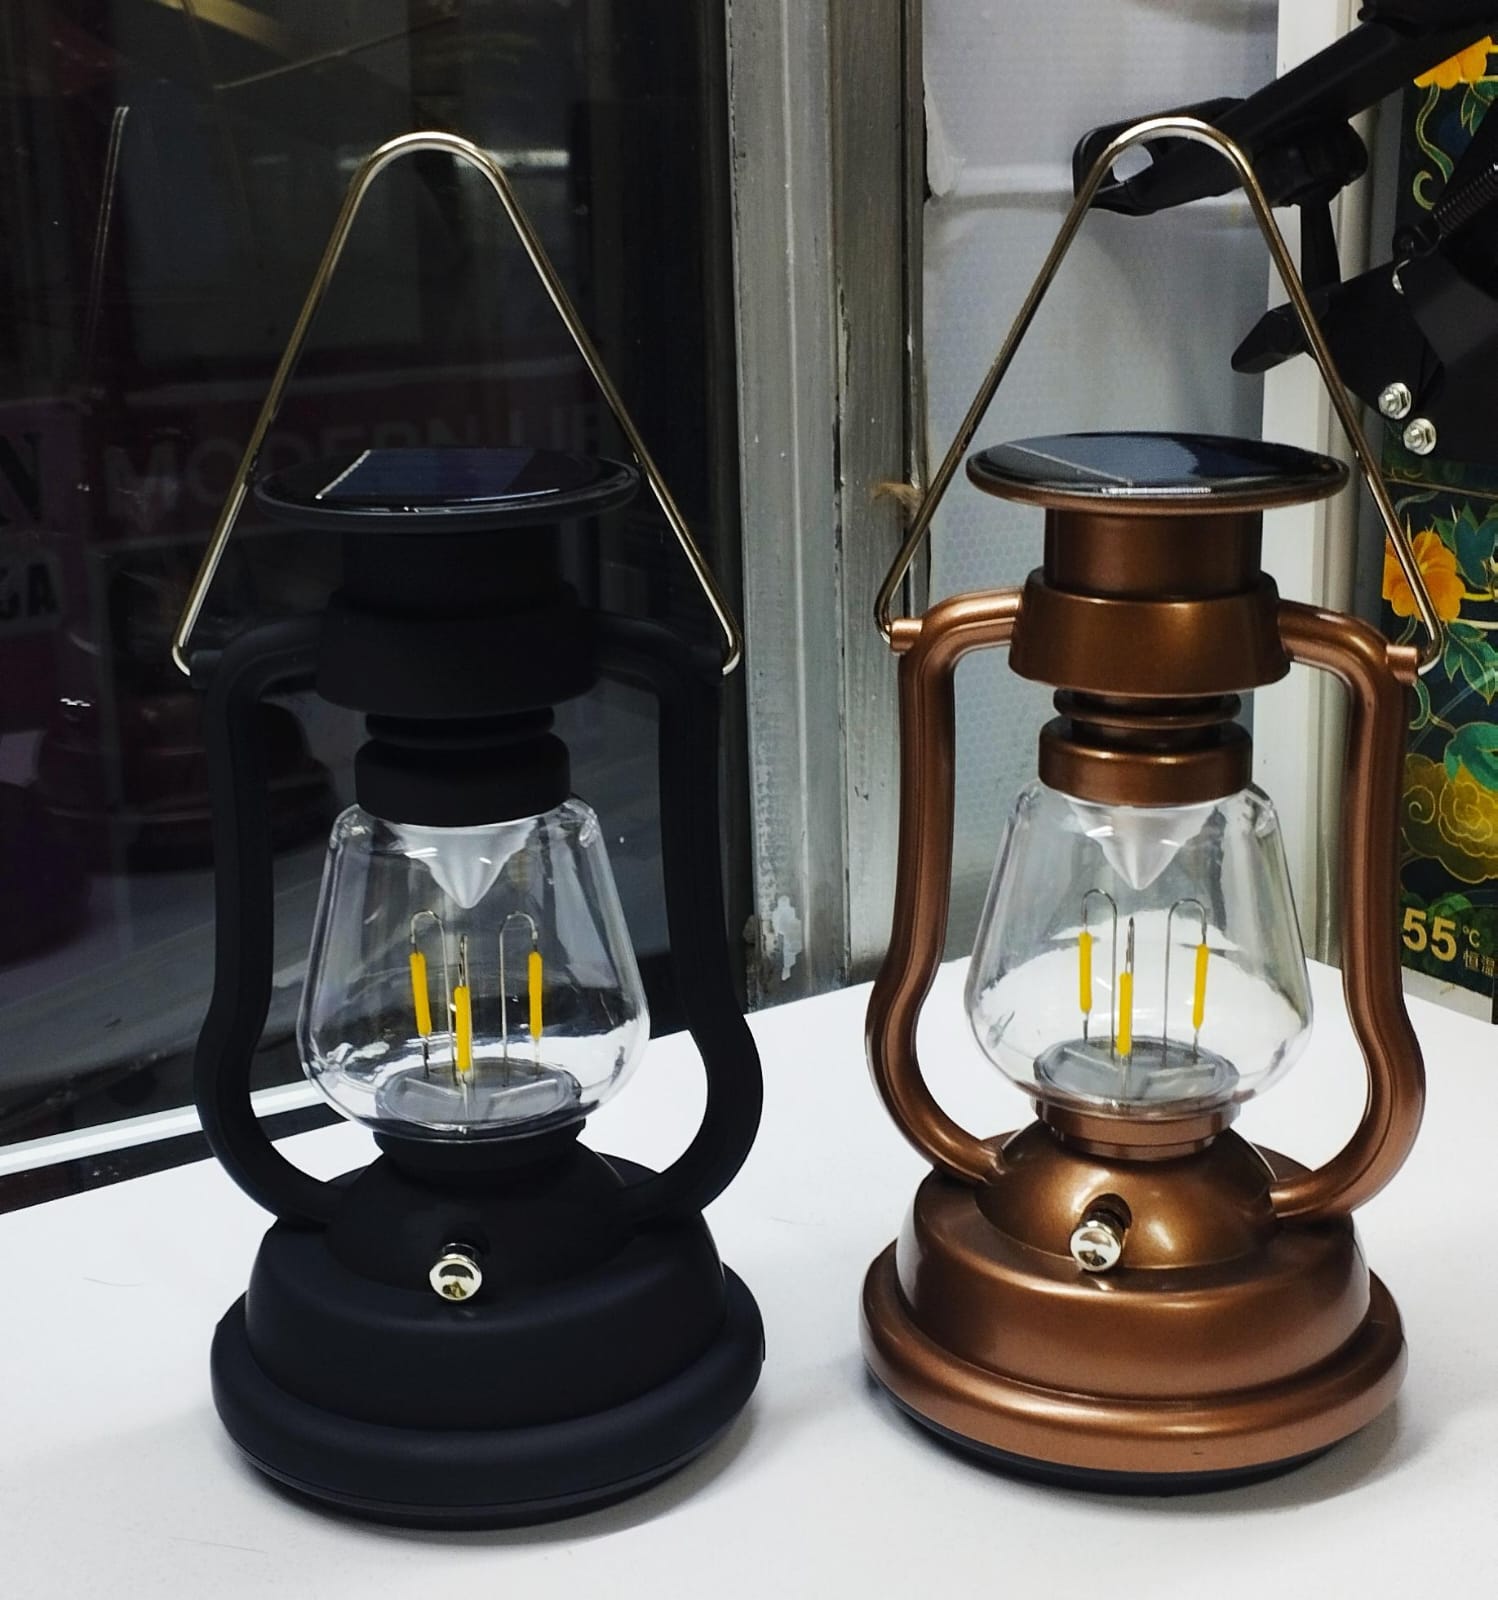 Vintage Portable Solar Lantern – Product insights and advice